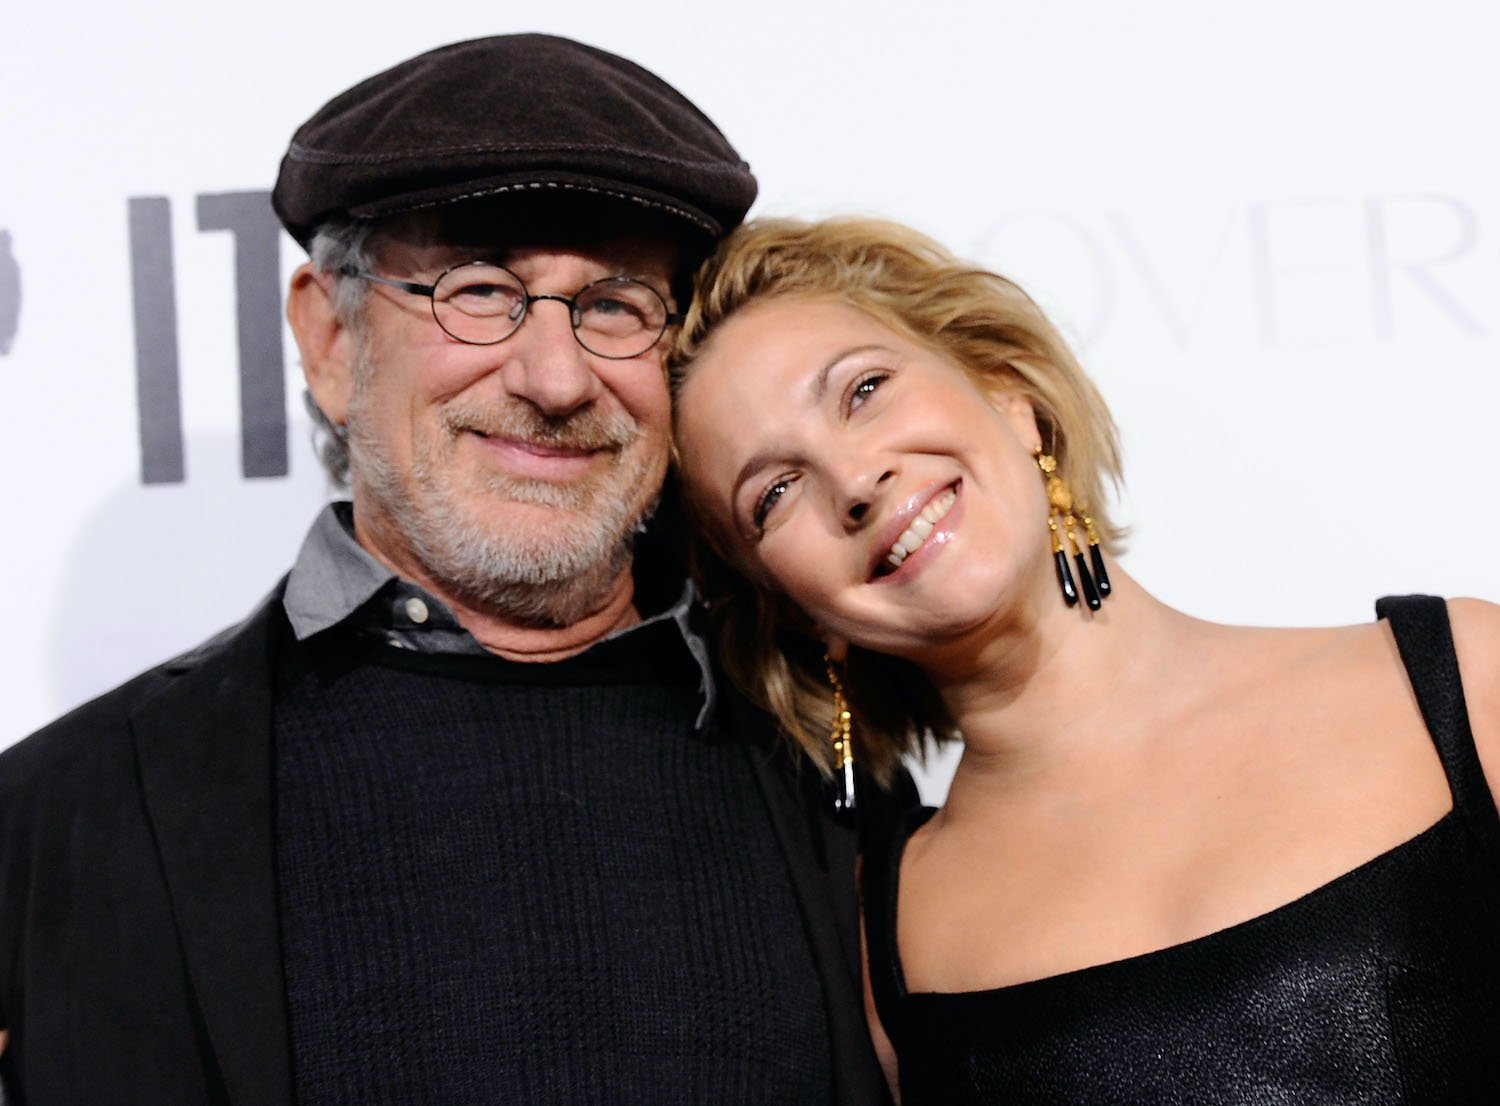 Steven Spielberg and Drew Barrymore smile on the red carpet at the premiere of 'Whip It' in 2009